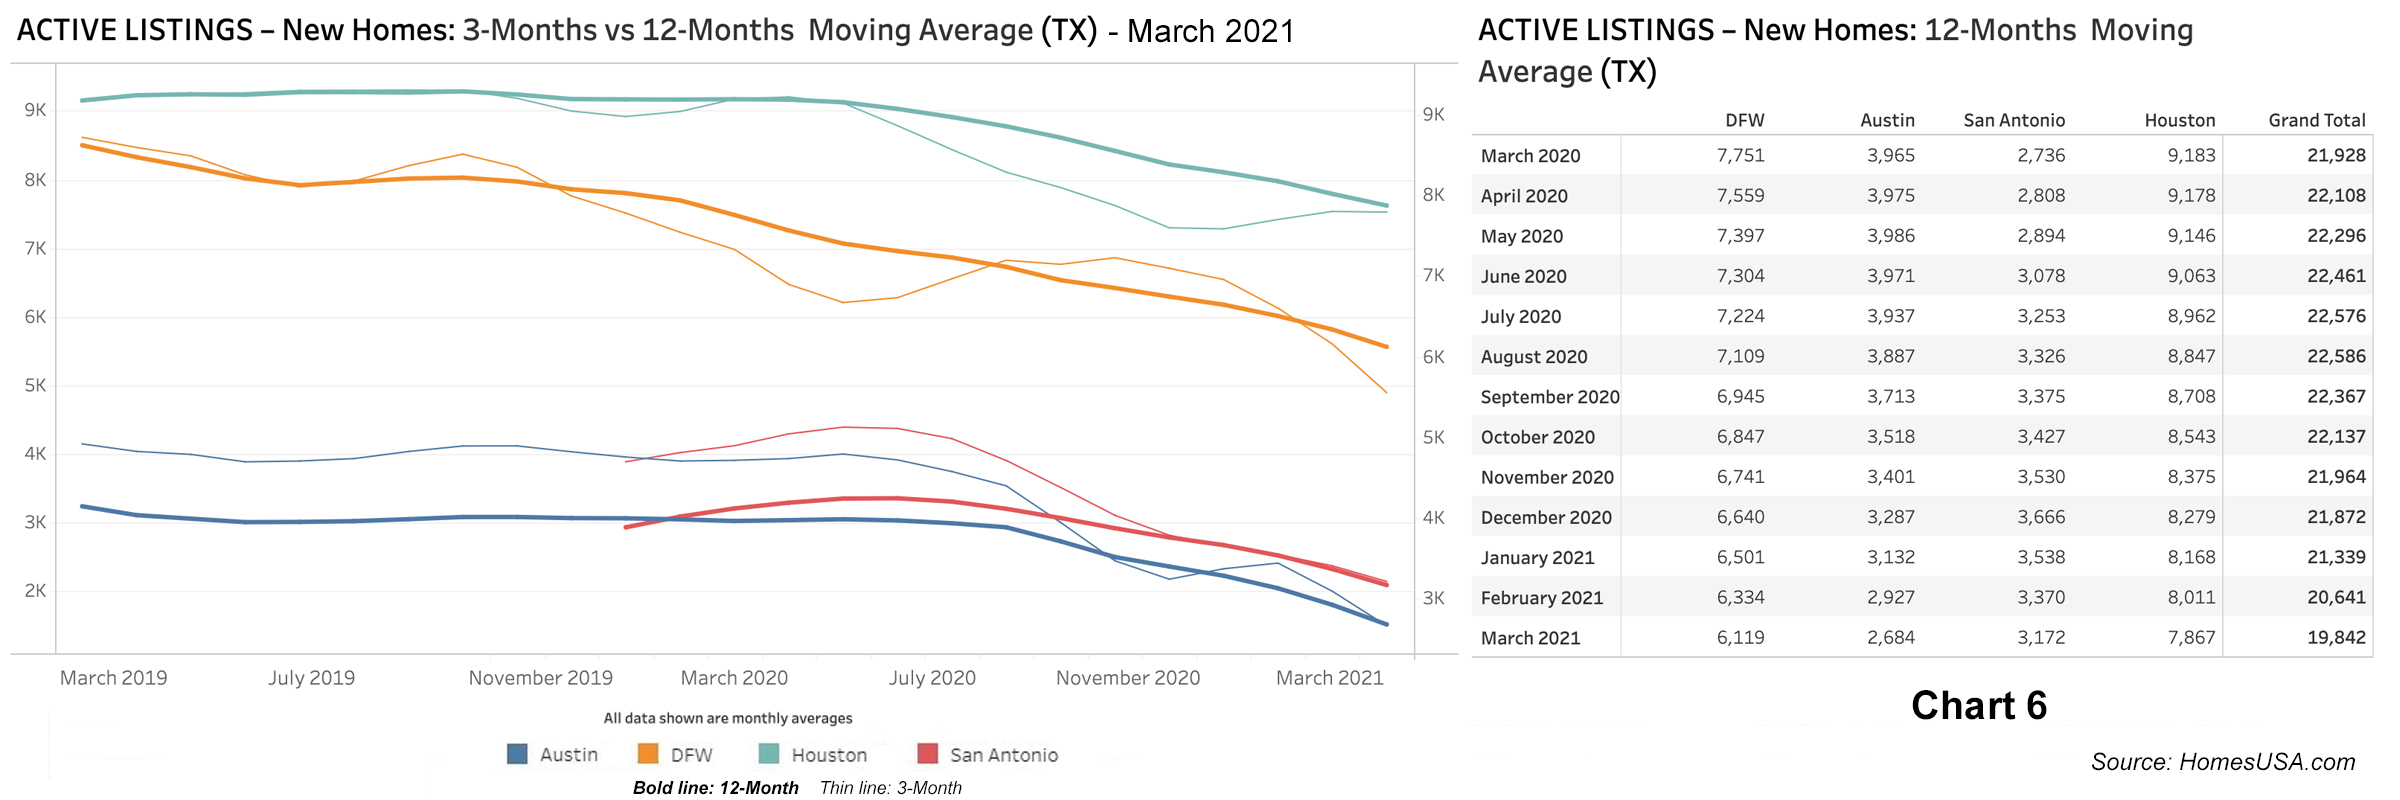 Chart 6: Active Listings for New Home Sales - March 2021